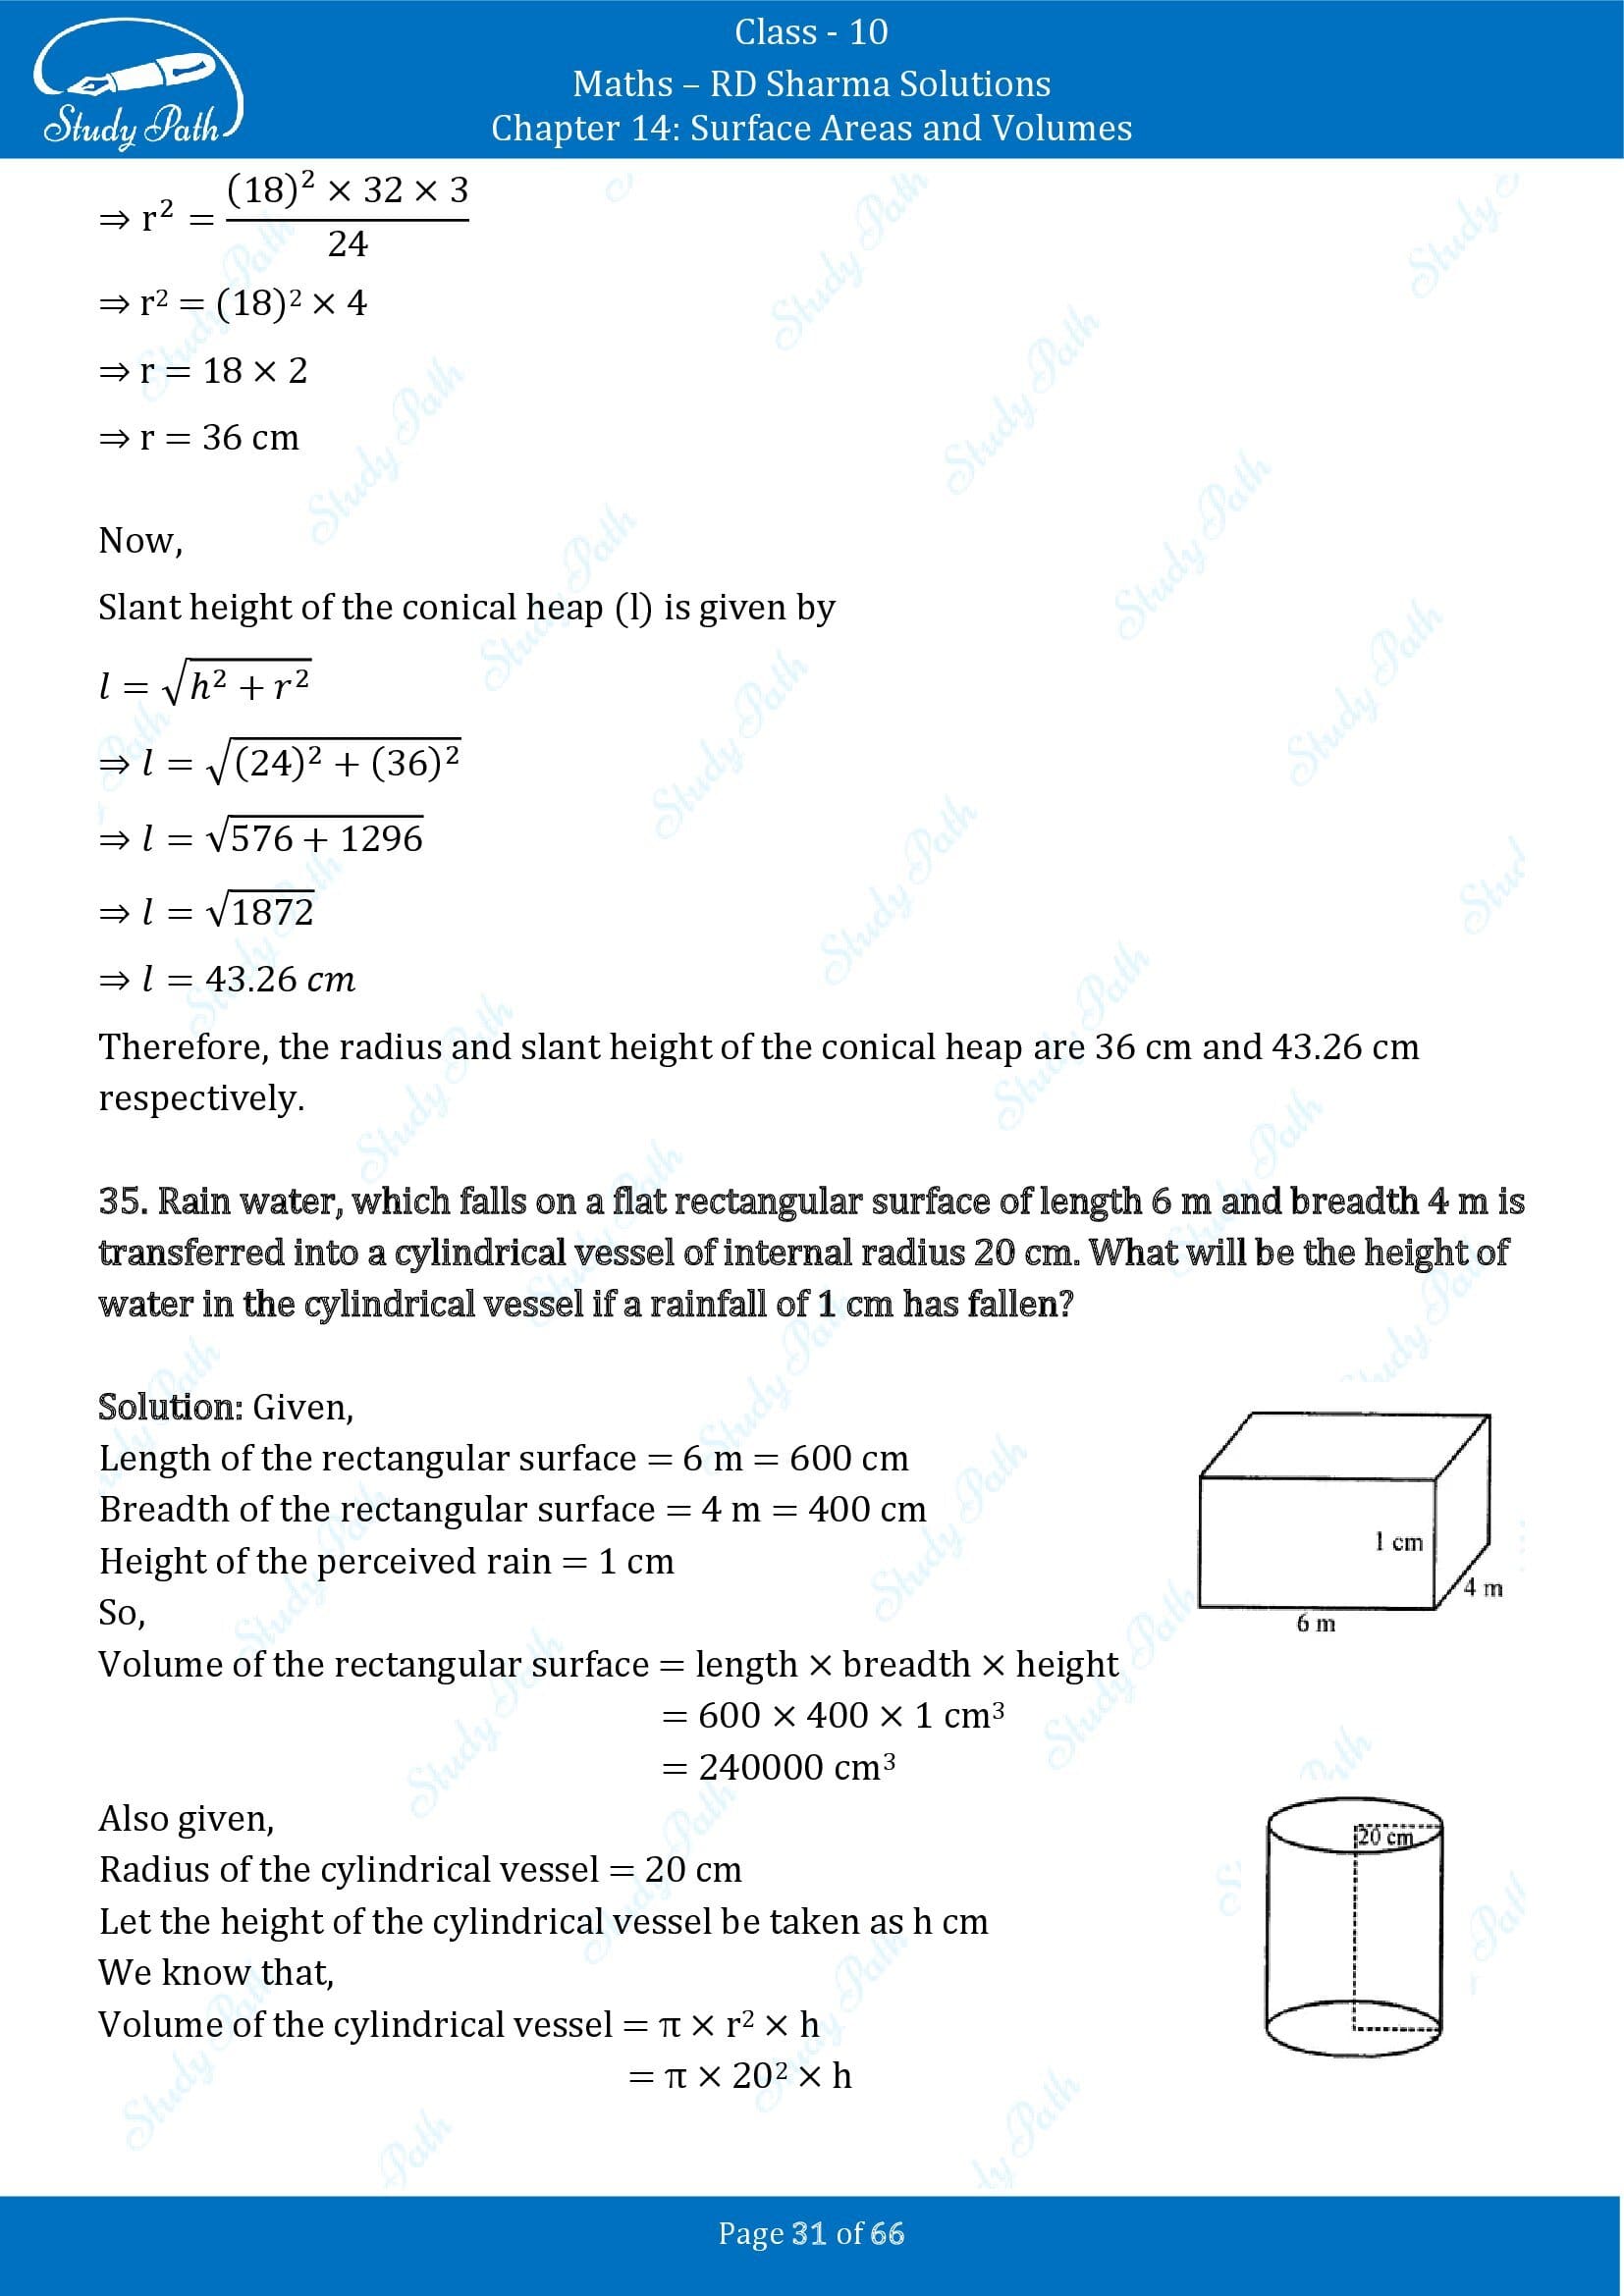 RD Sharma Solutions Class 10 Chapter 14 Surface Areas and Volumes Exercise 14.1 00031